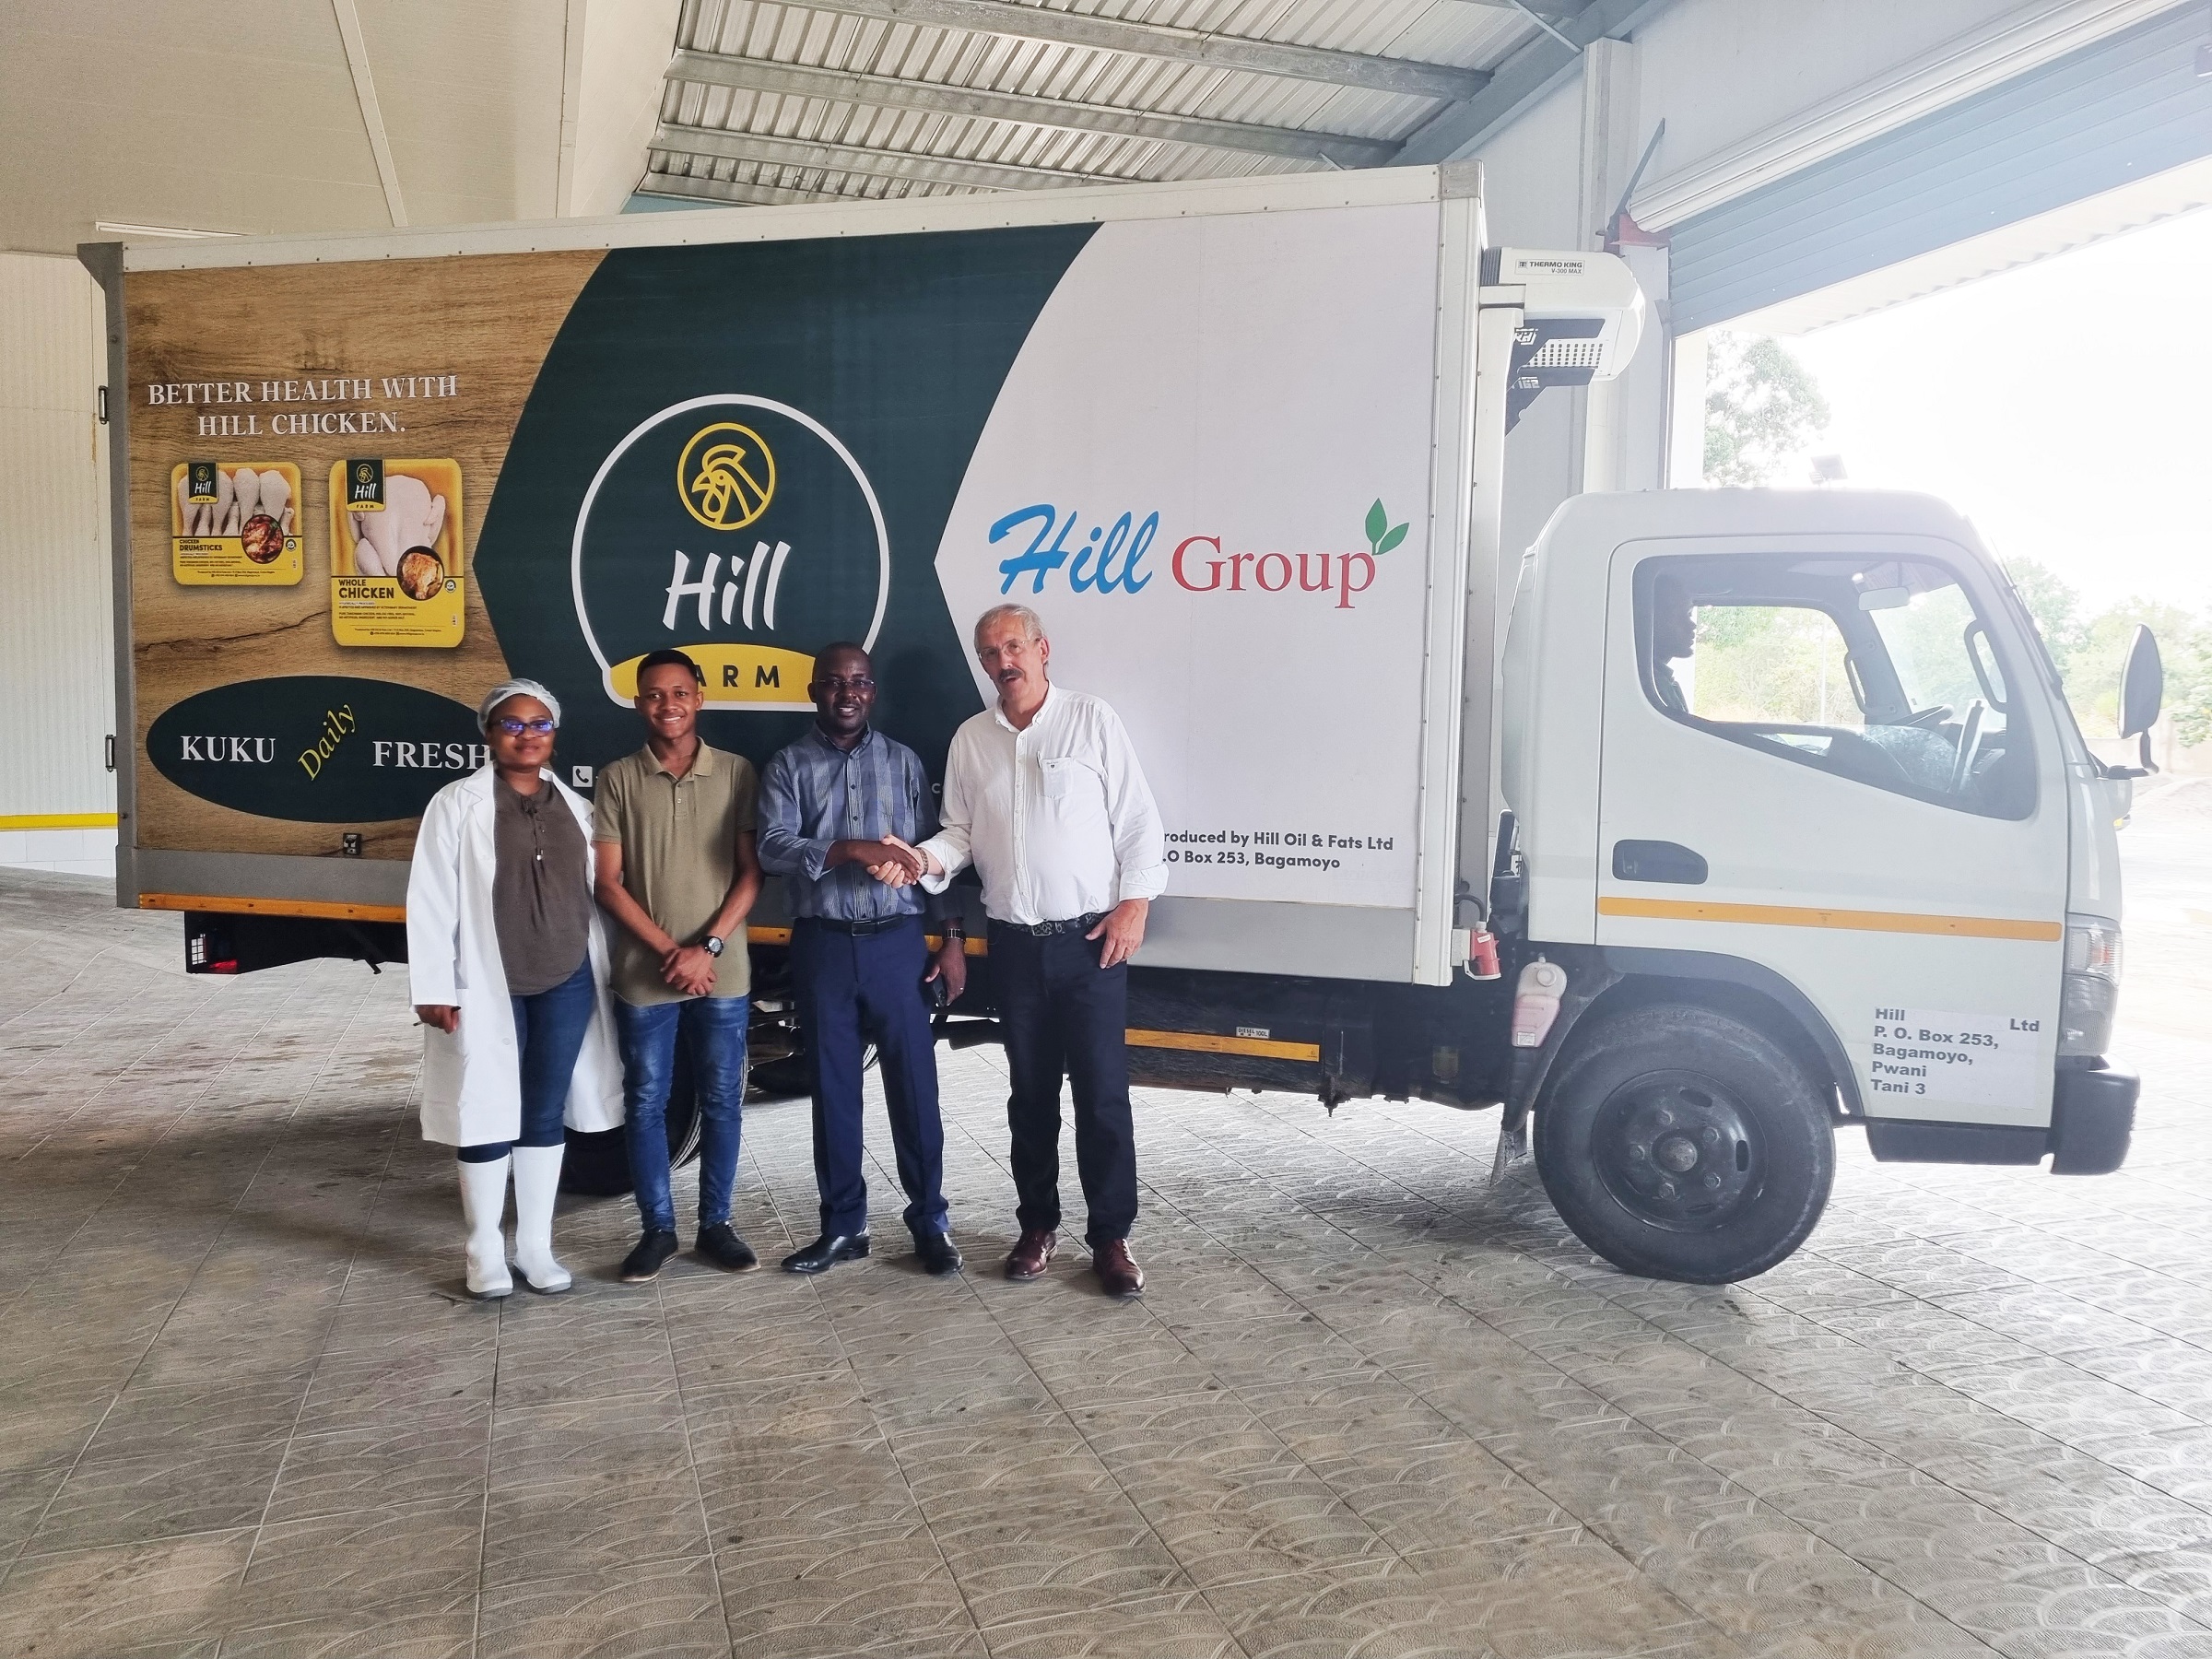 Hill Group Truck People